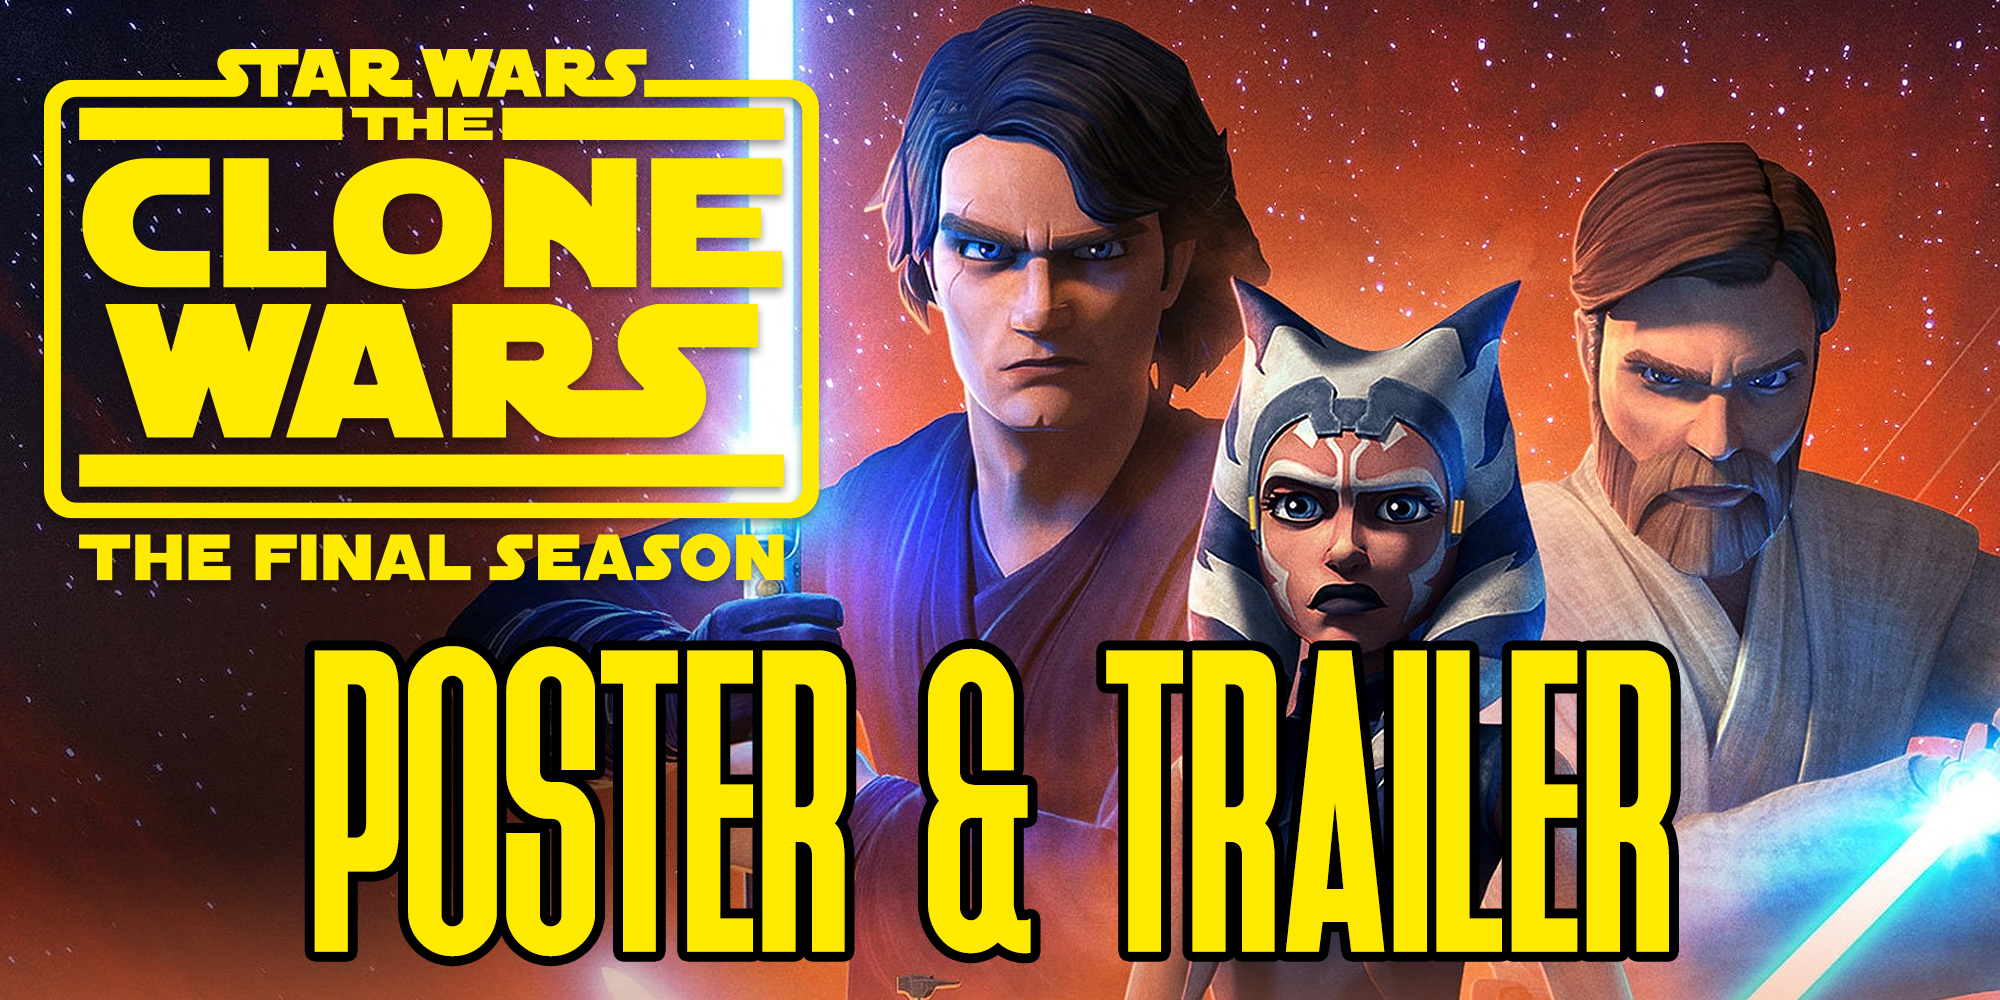 Star Wars The Clone Wars Poster And Launch Date Reveal